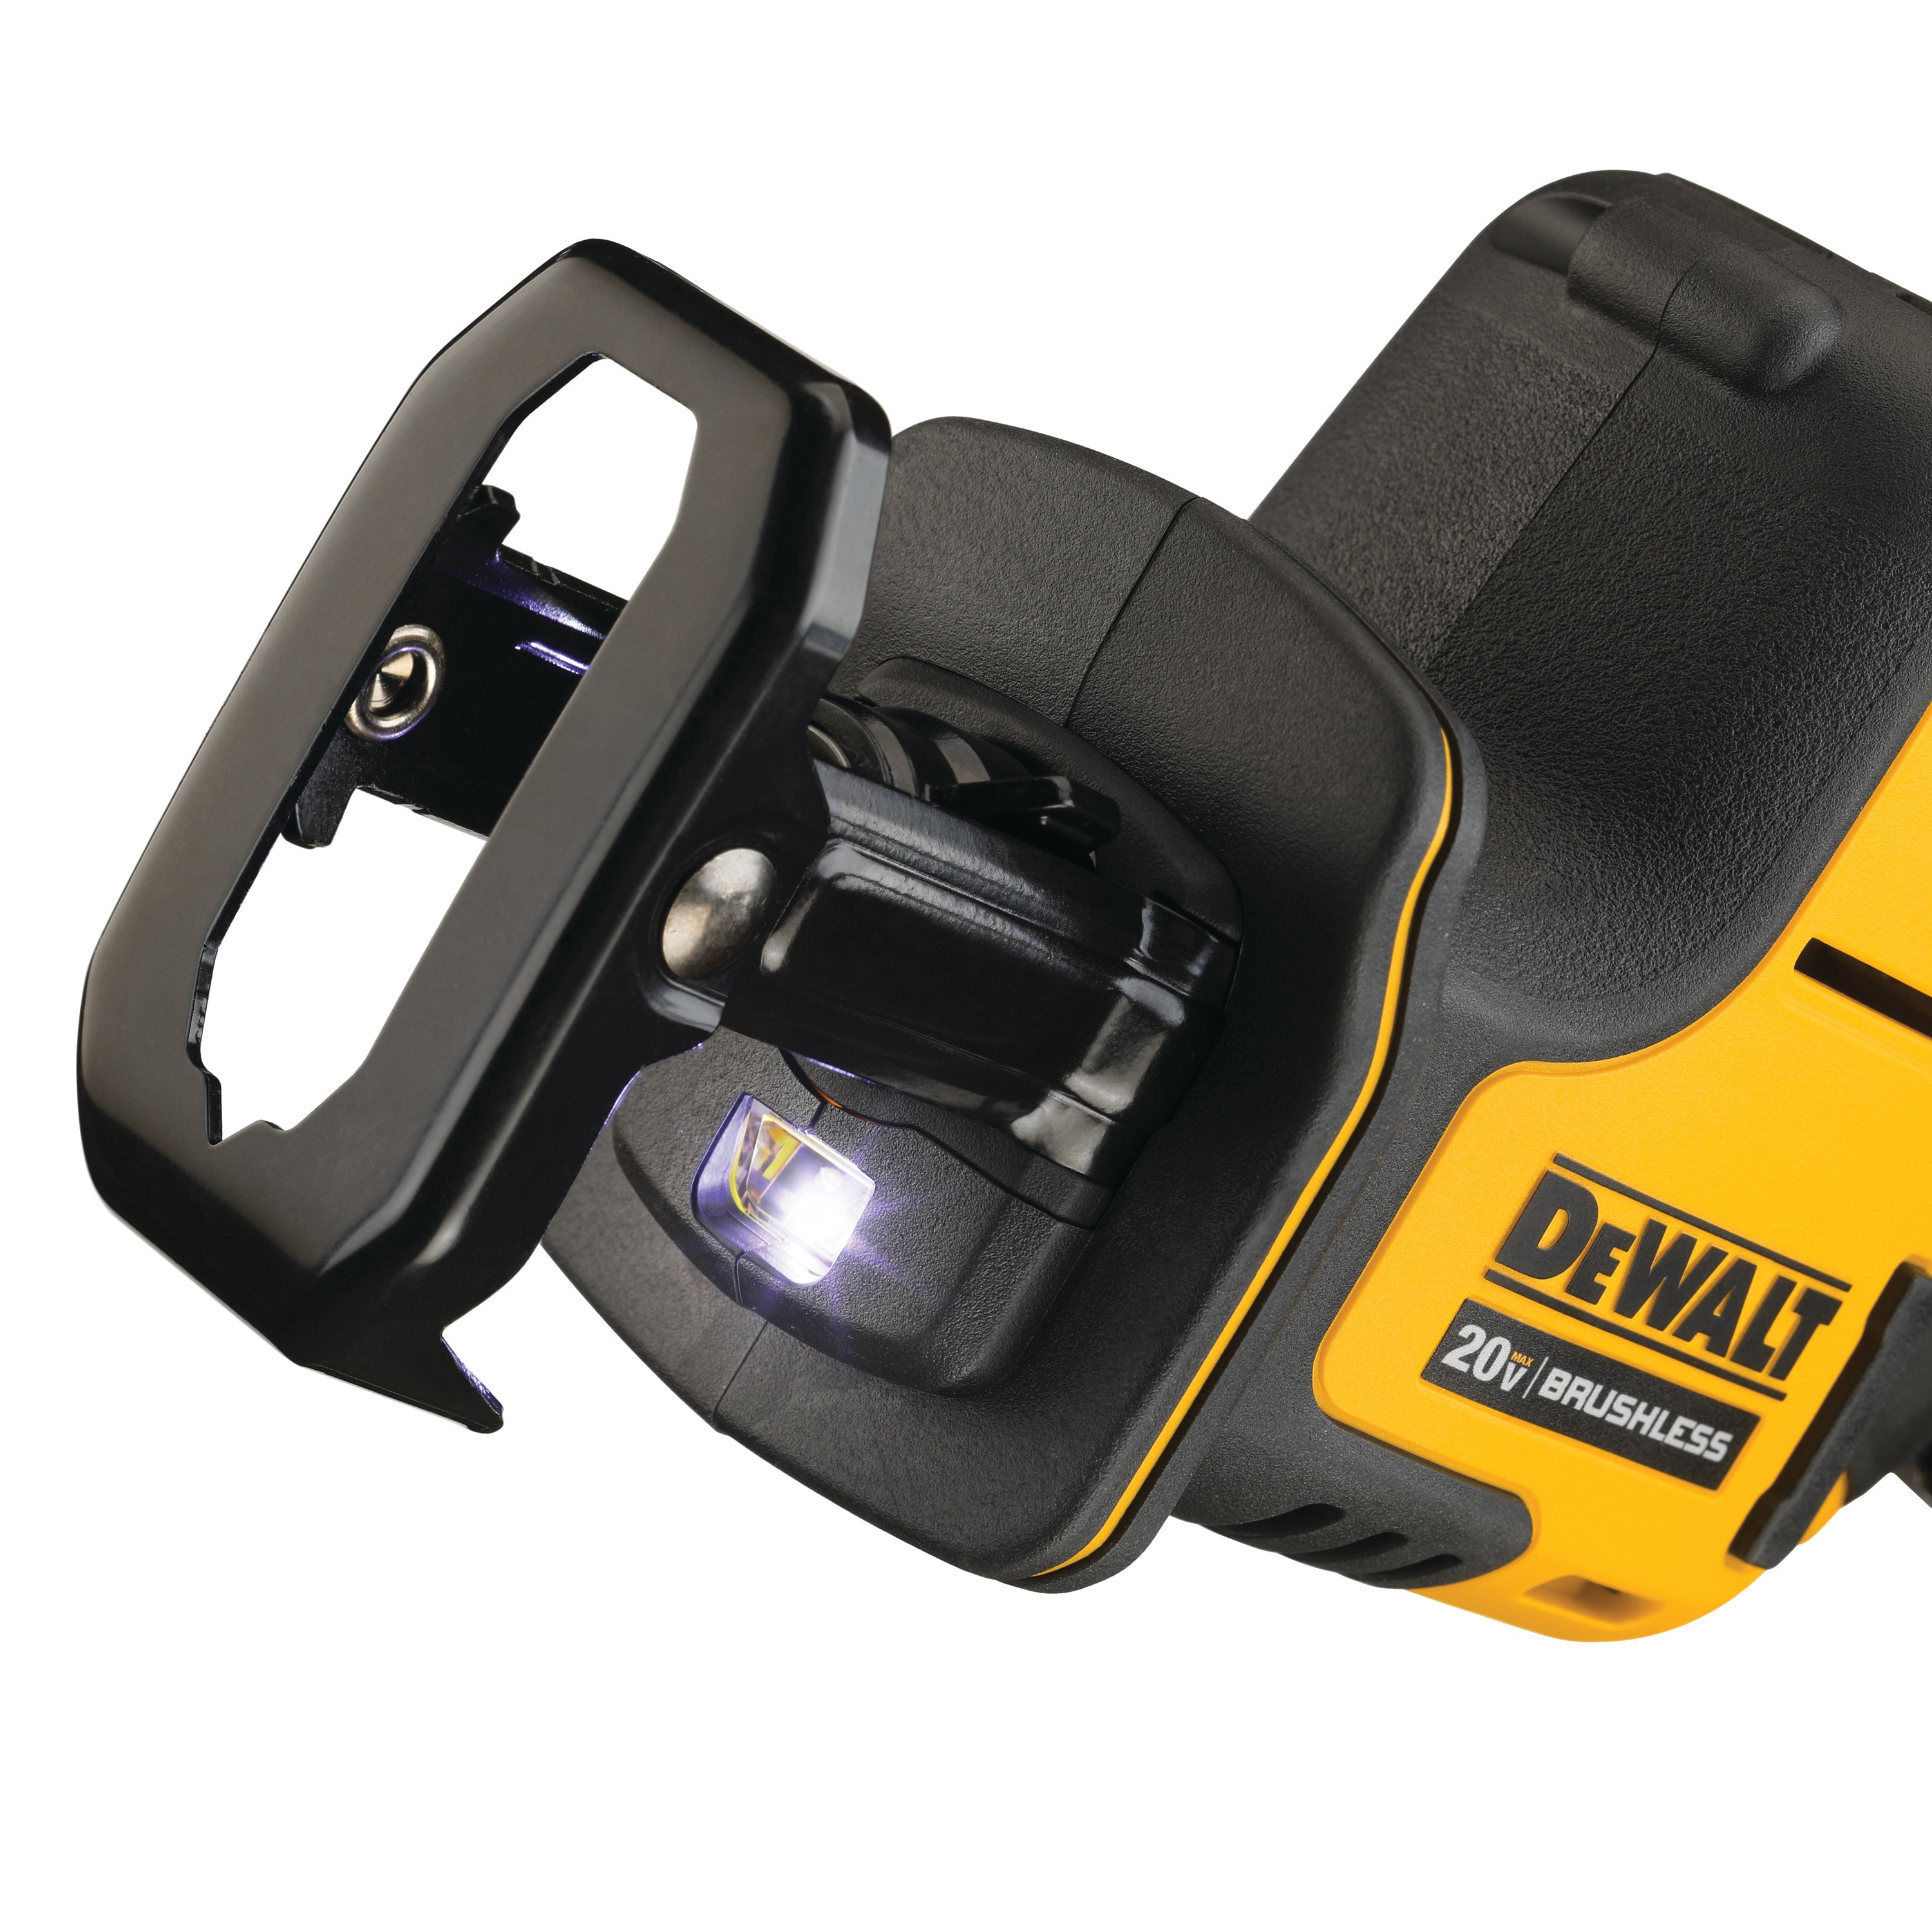 Bright LED light feature of Cordless One Handed Reciprocating Saw